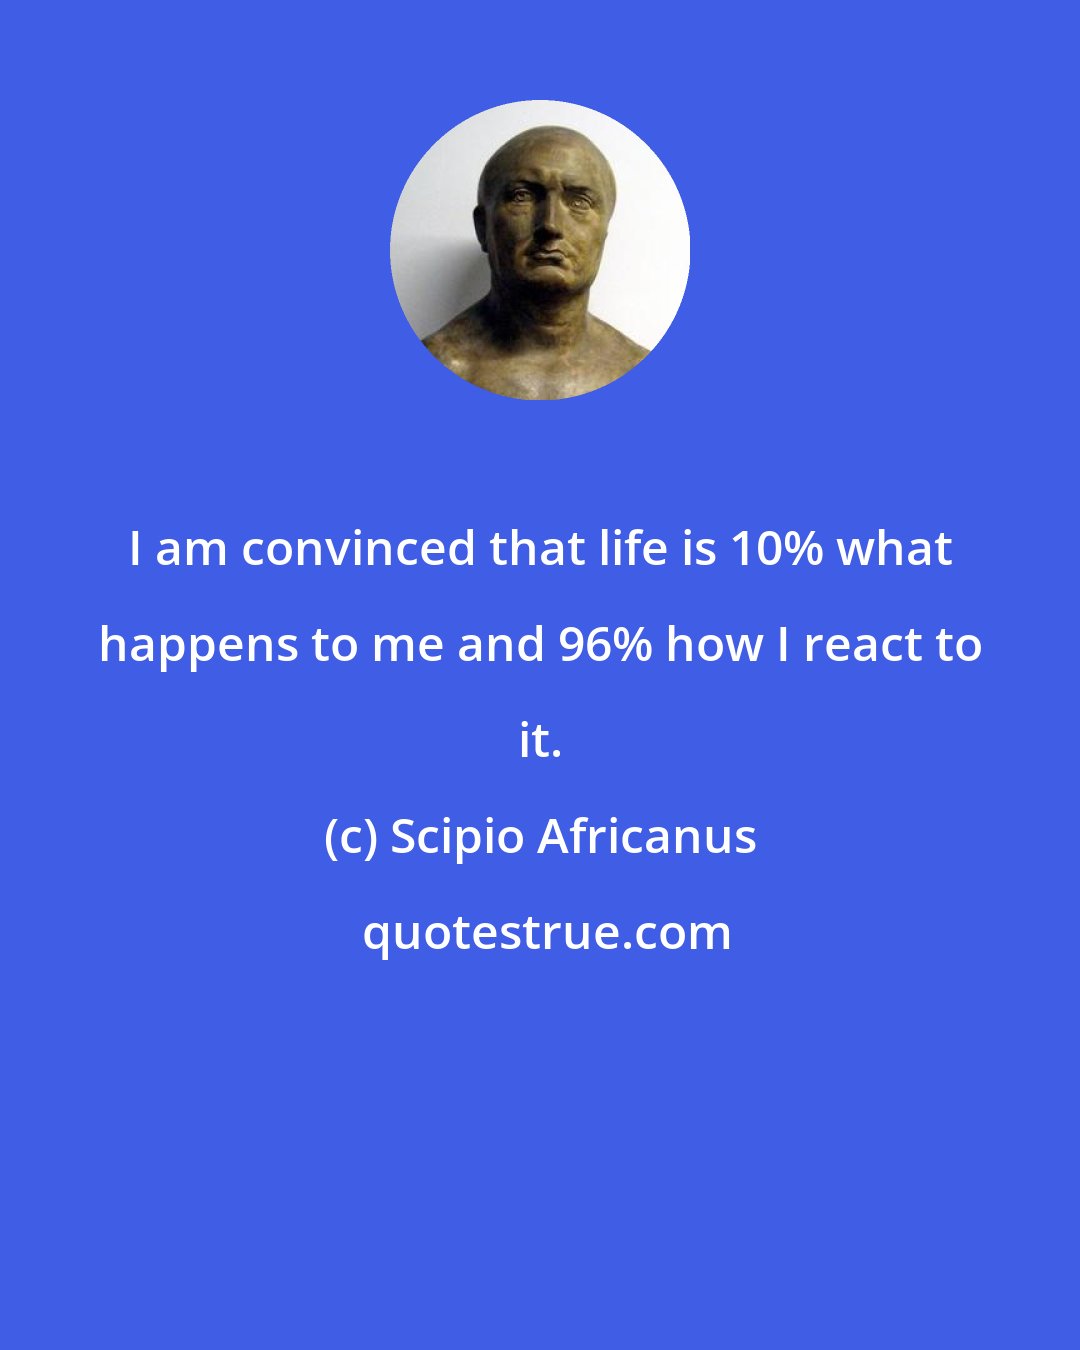 Scipio Africanus: I am convinced that life is 10% what happens to me and 96% how I react to it.